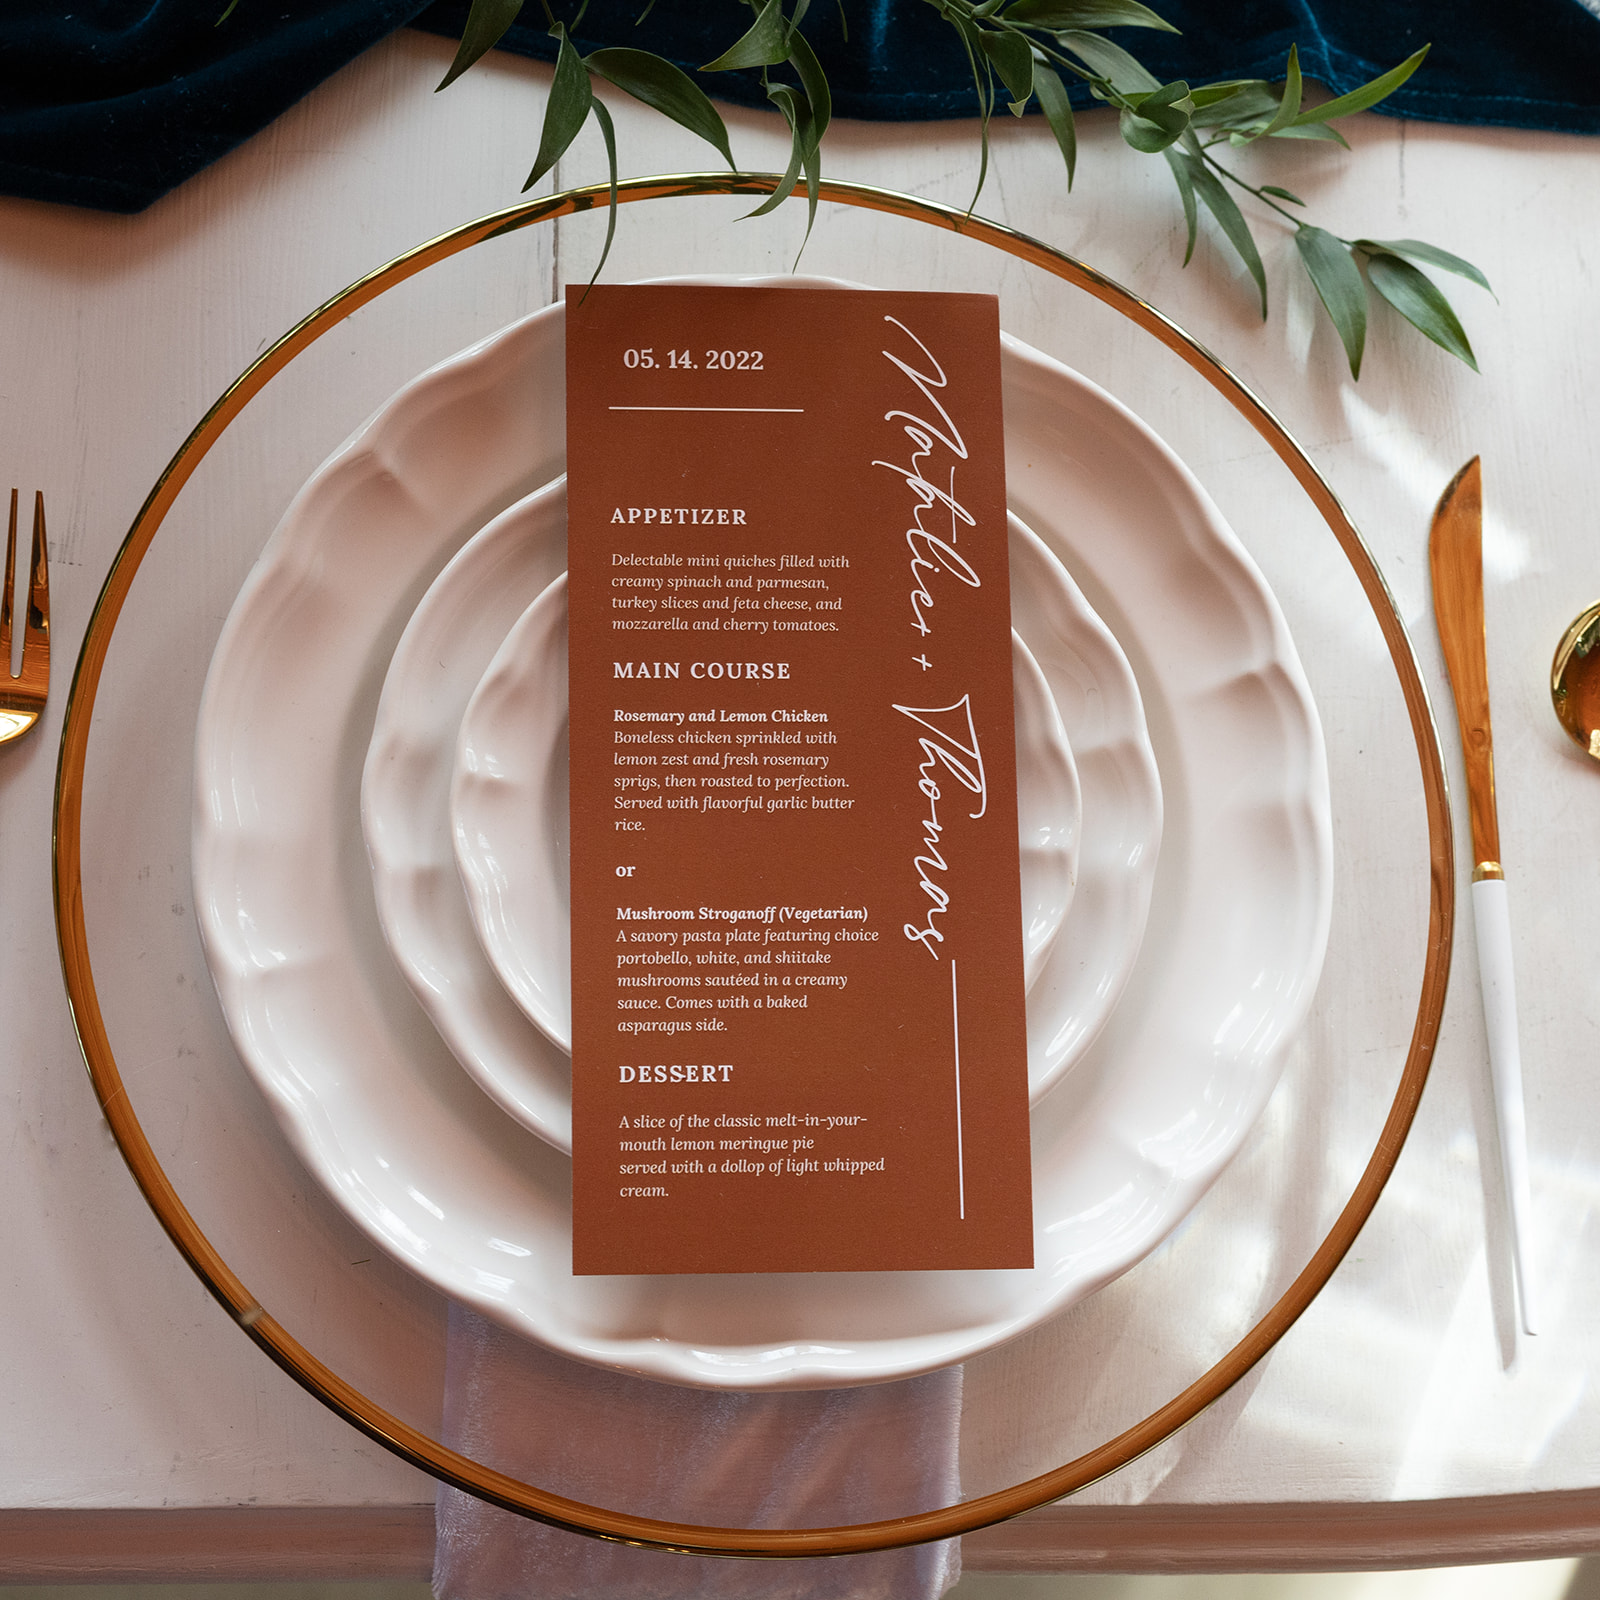 The table setting and menu at the honeymoon table